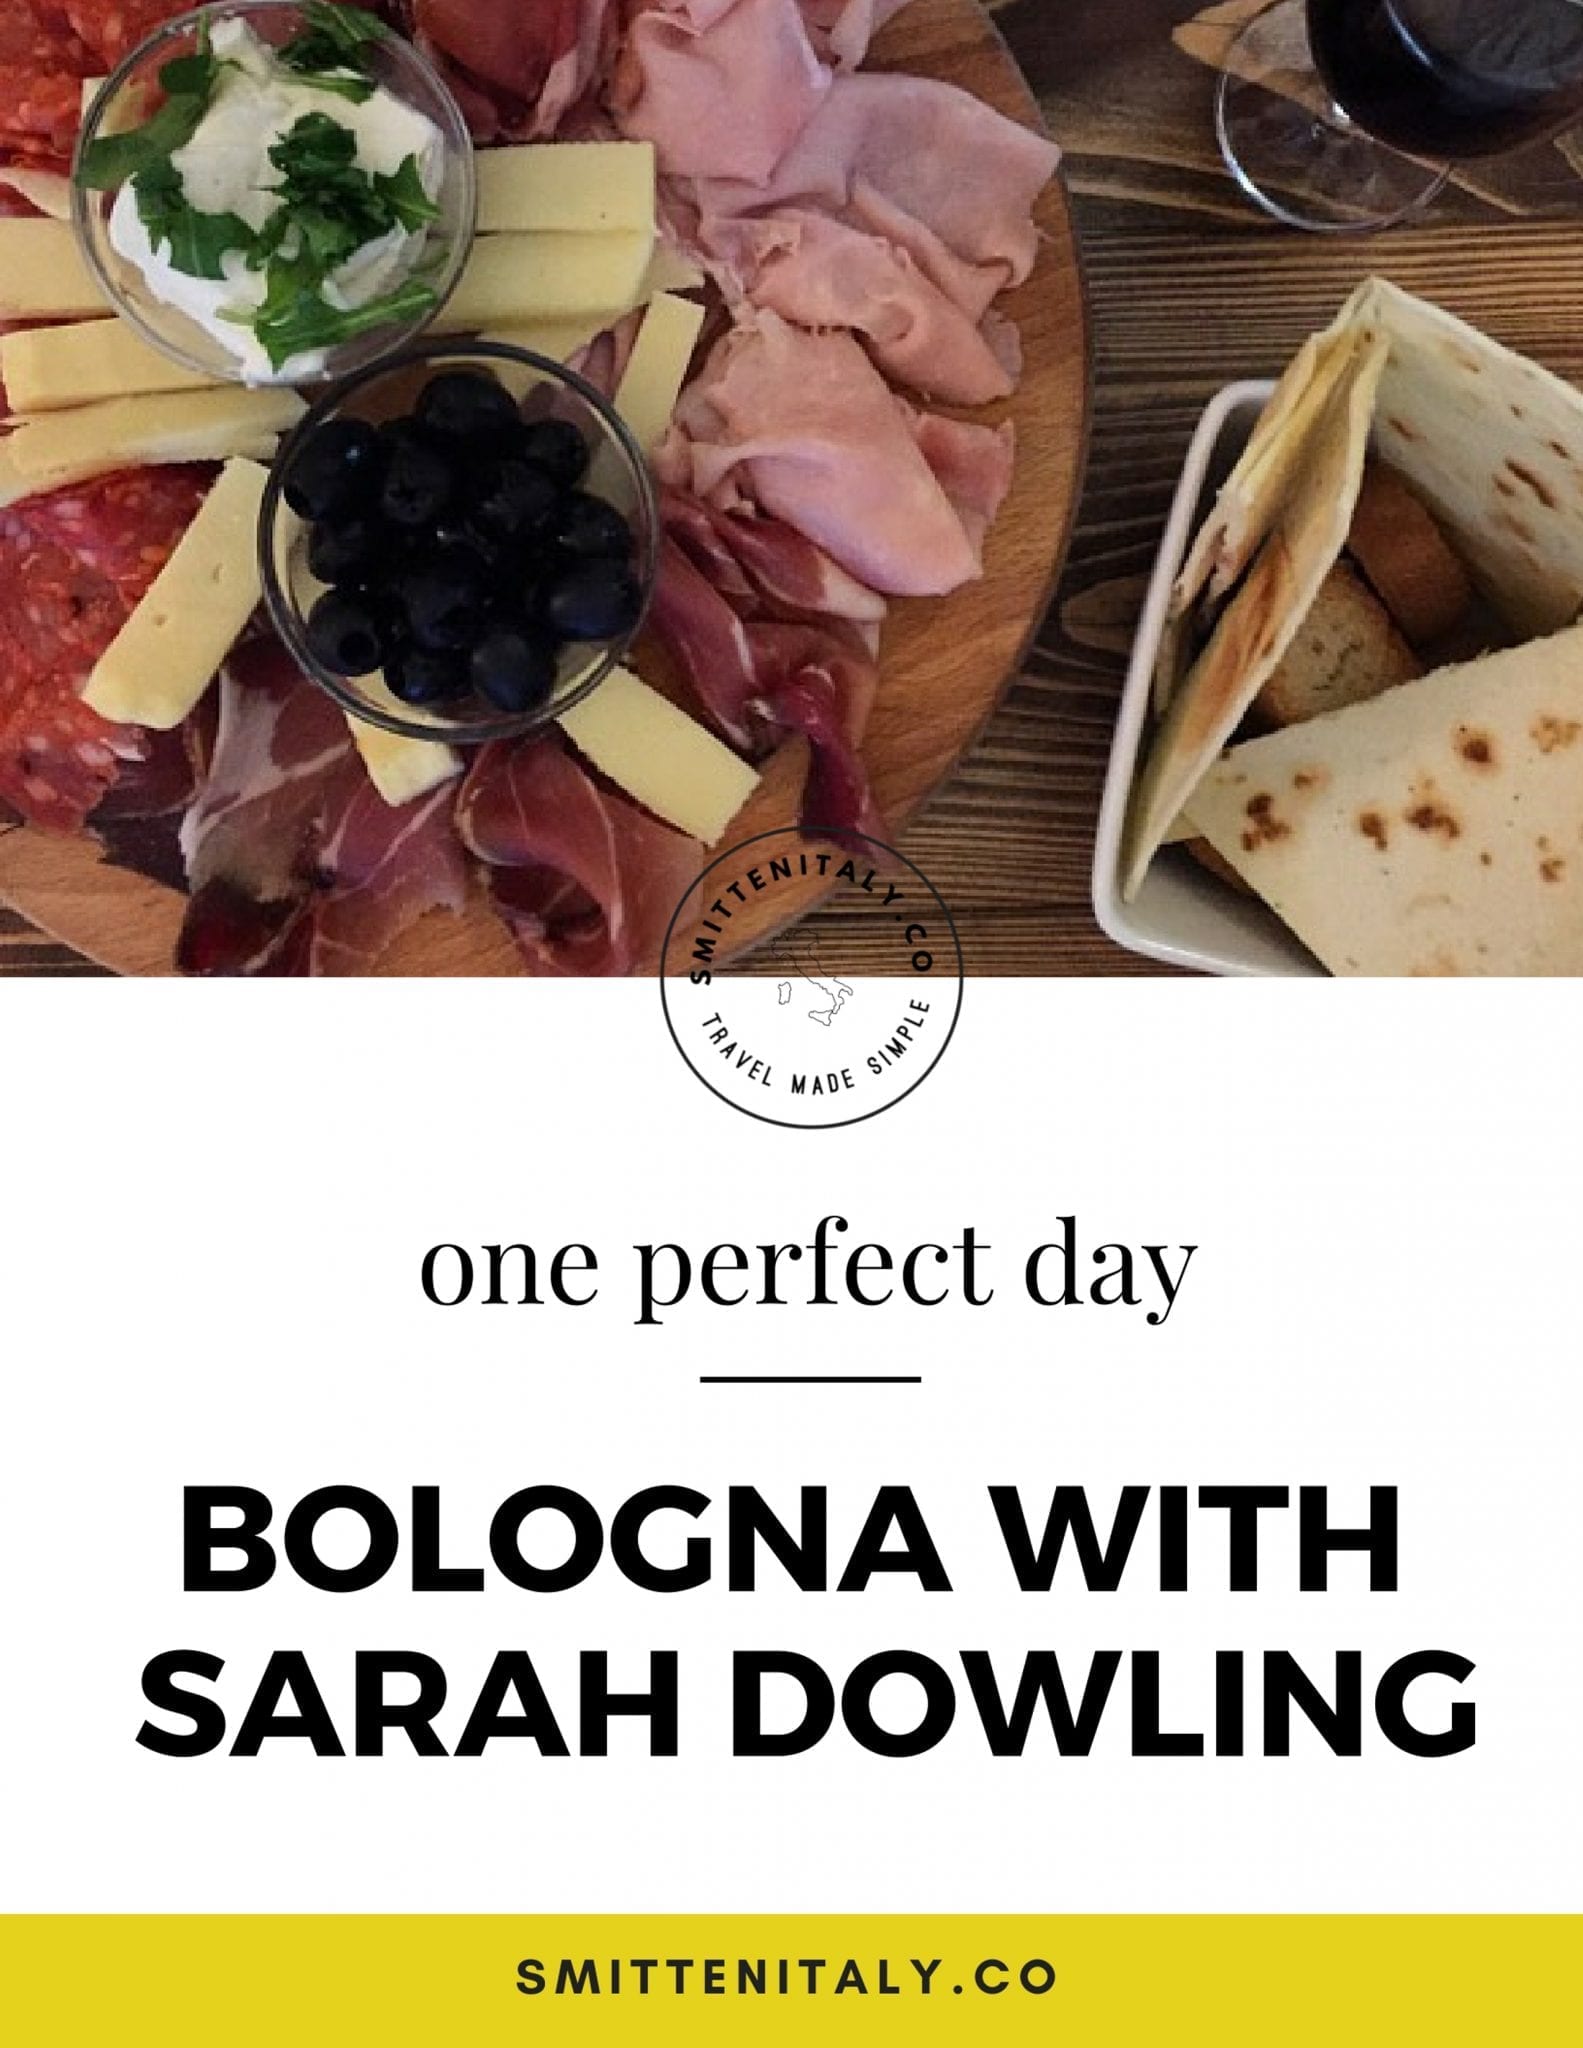 One Perfect Day Travel Guides: Bologna, Italy with Sarah Dowling